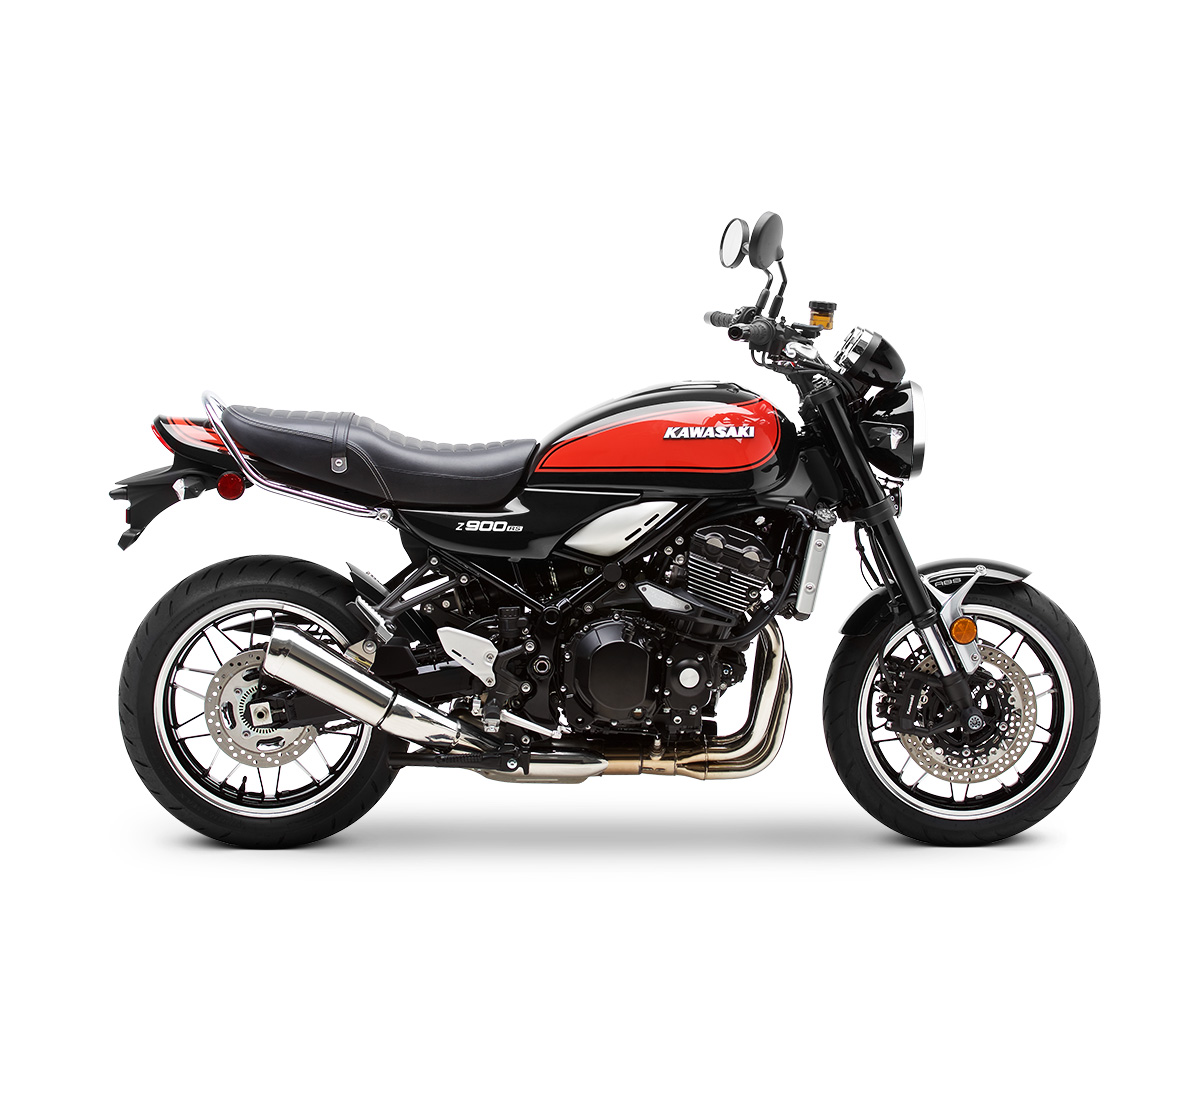 Z900 RS Retro Package